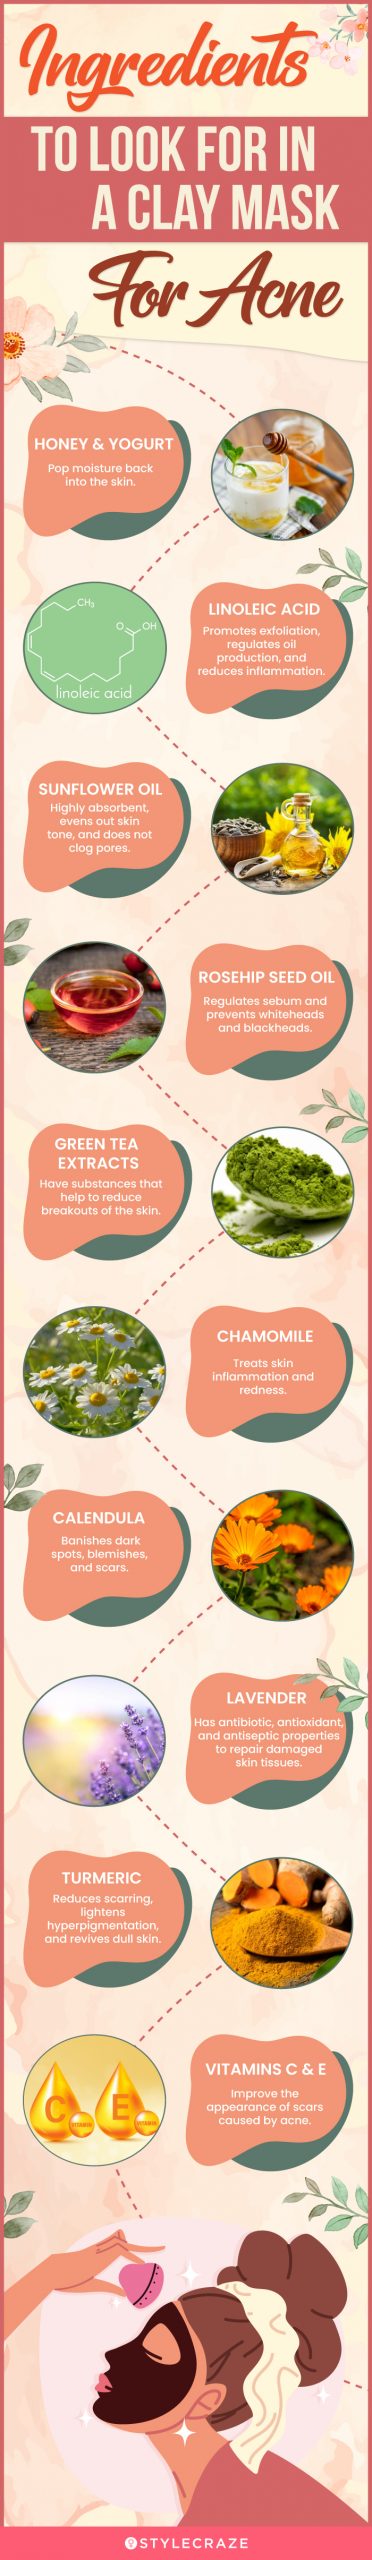 Ingredients To Look For In A Clay Mask For Acne [infographic]